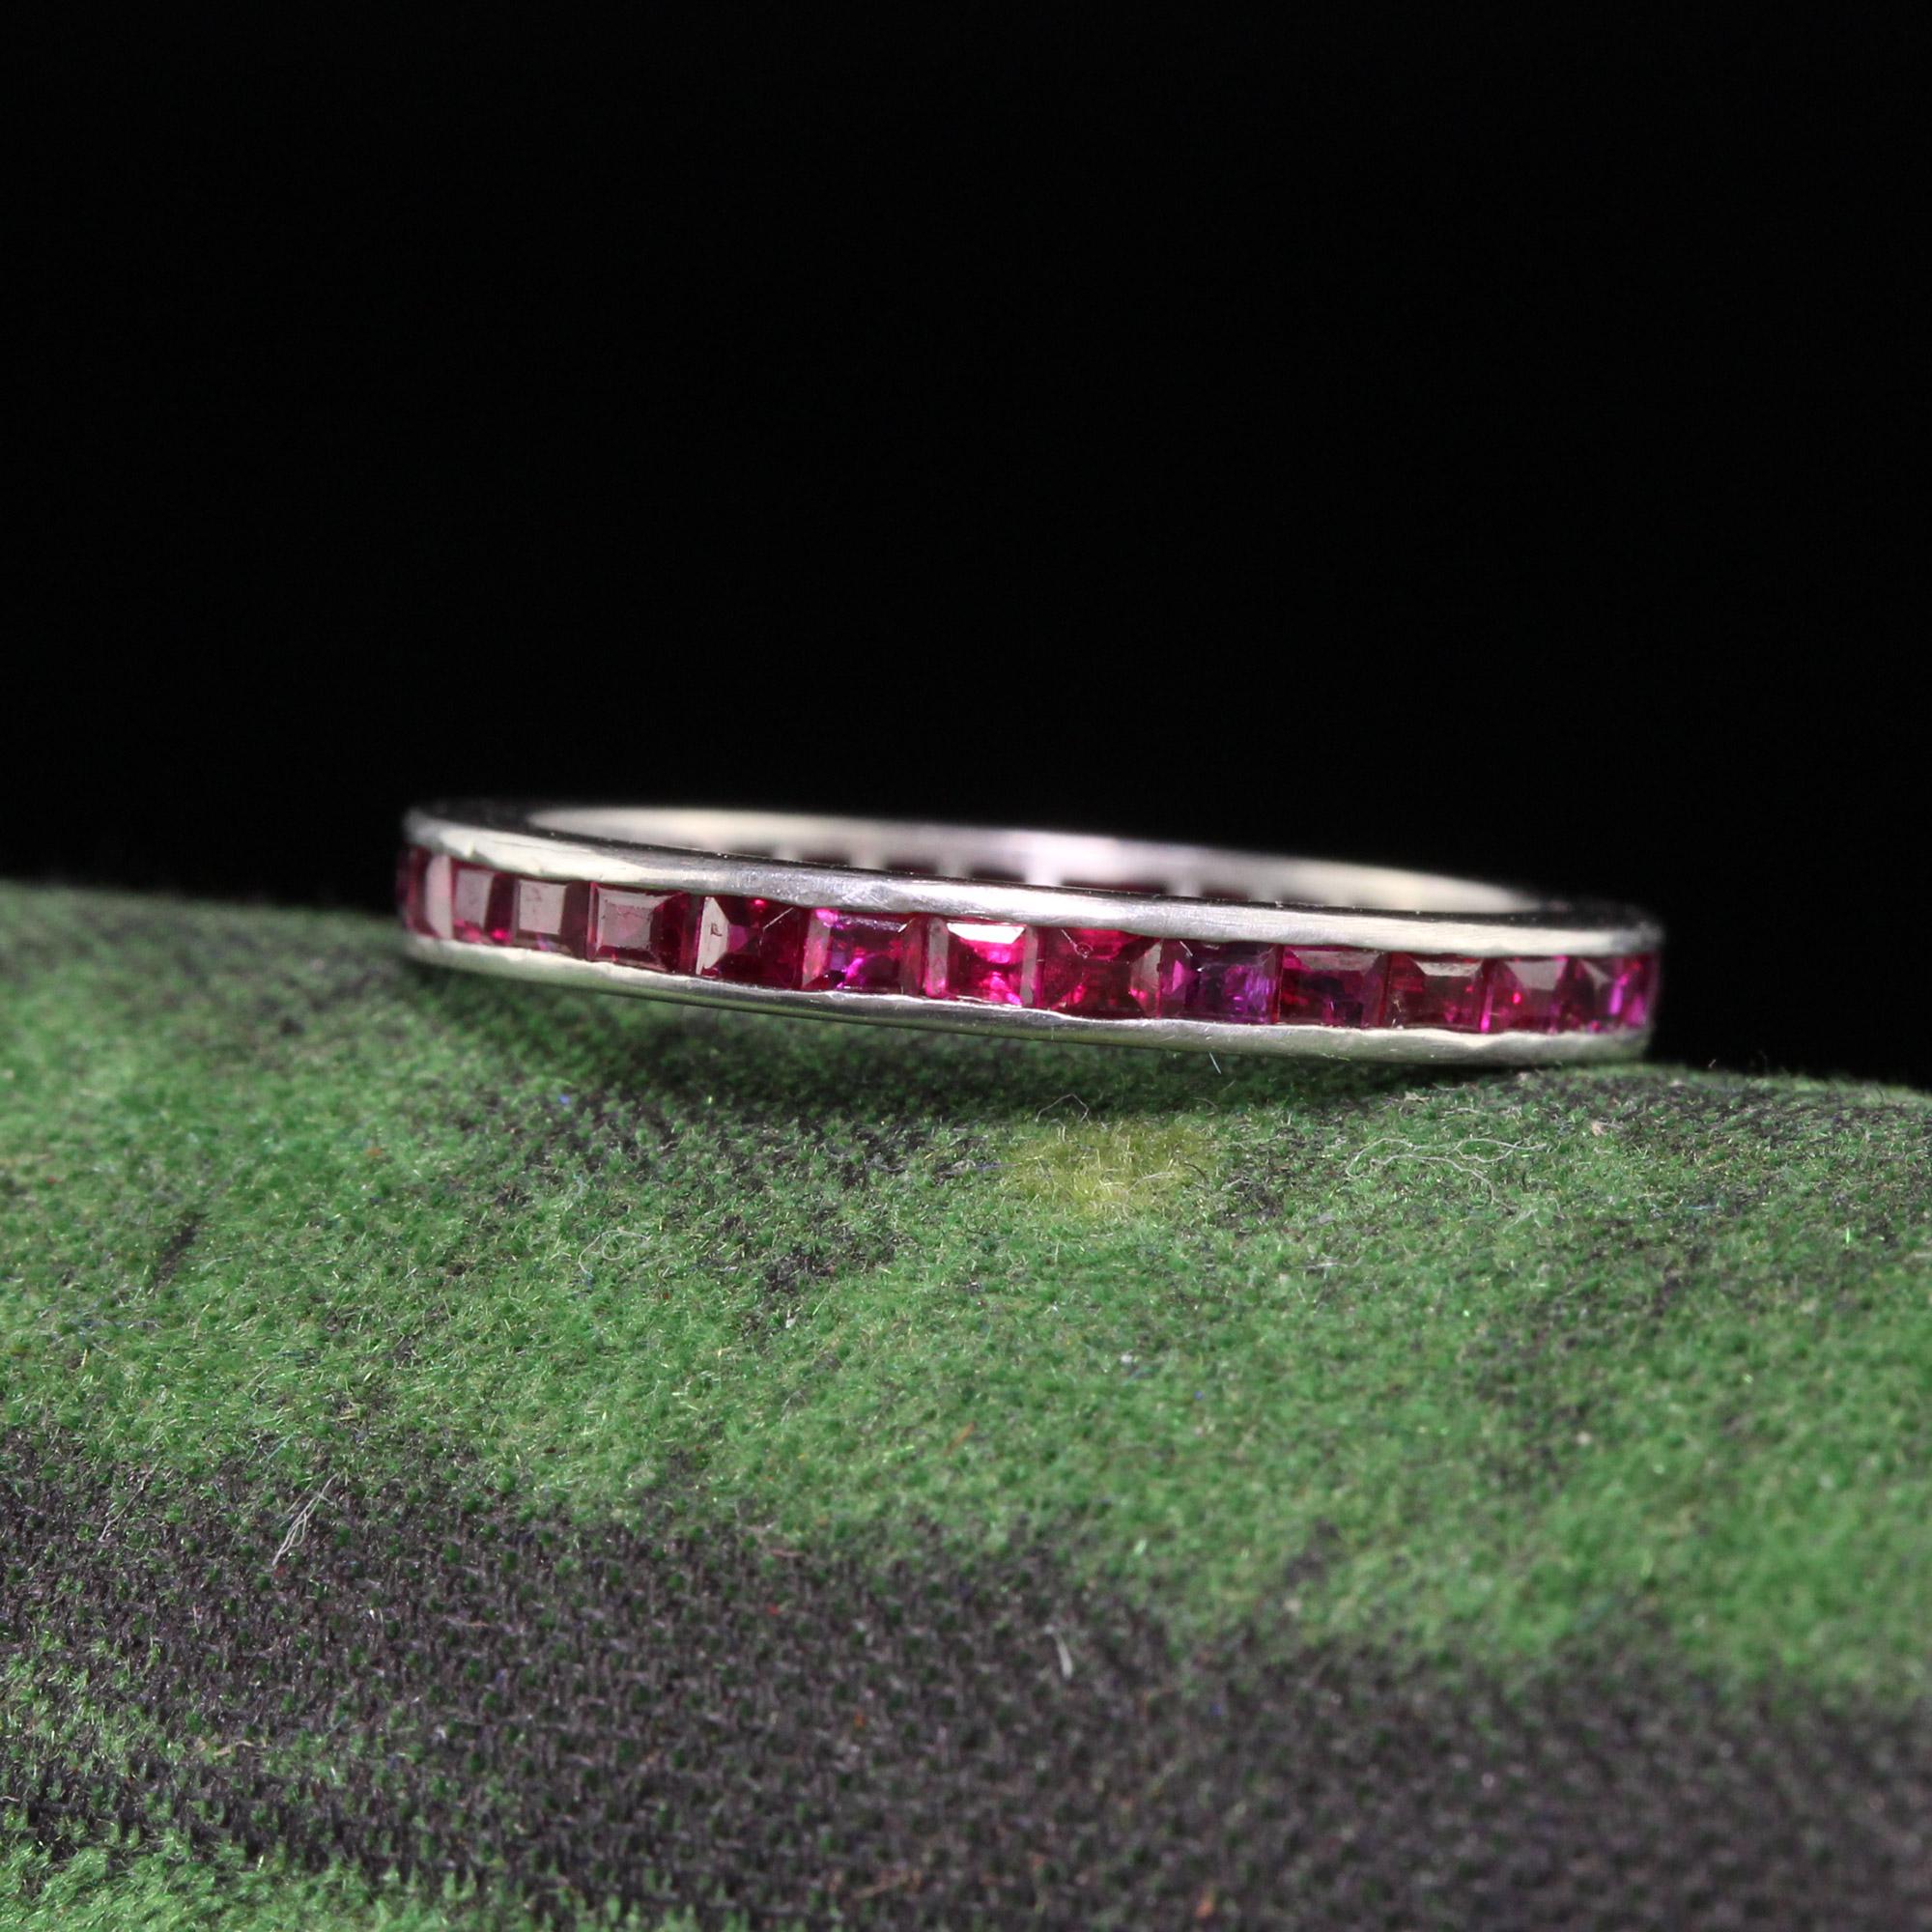 Beautiful Antique Art Deco Platinum Square Cut Ruby Eternity Band - Size 4. This beautiful band is crafted in platinum. The ring features natural square cut rubies going around the entire band. The ring is in good condition and ready to wear.

Item